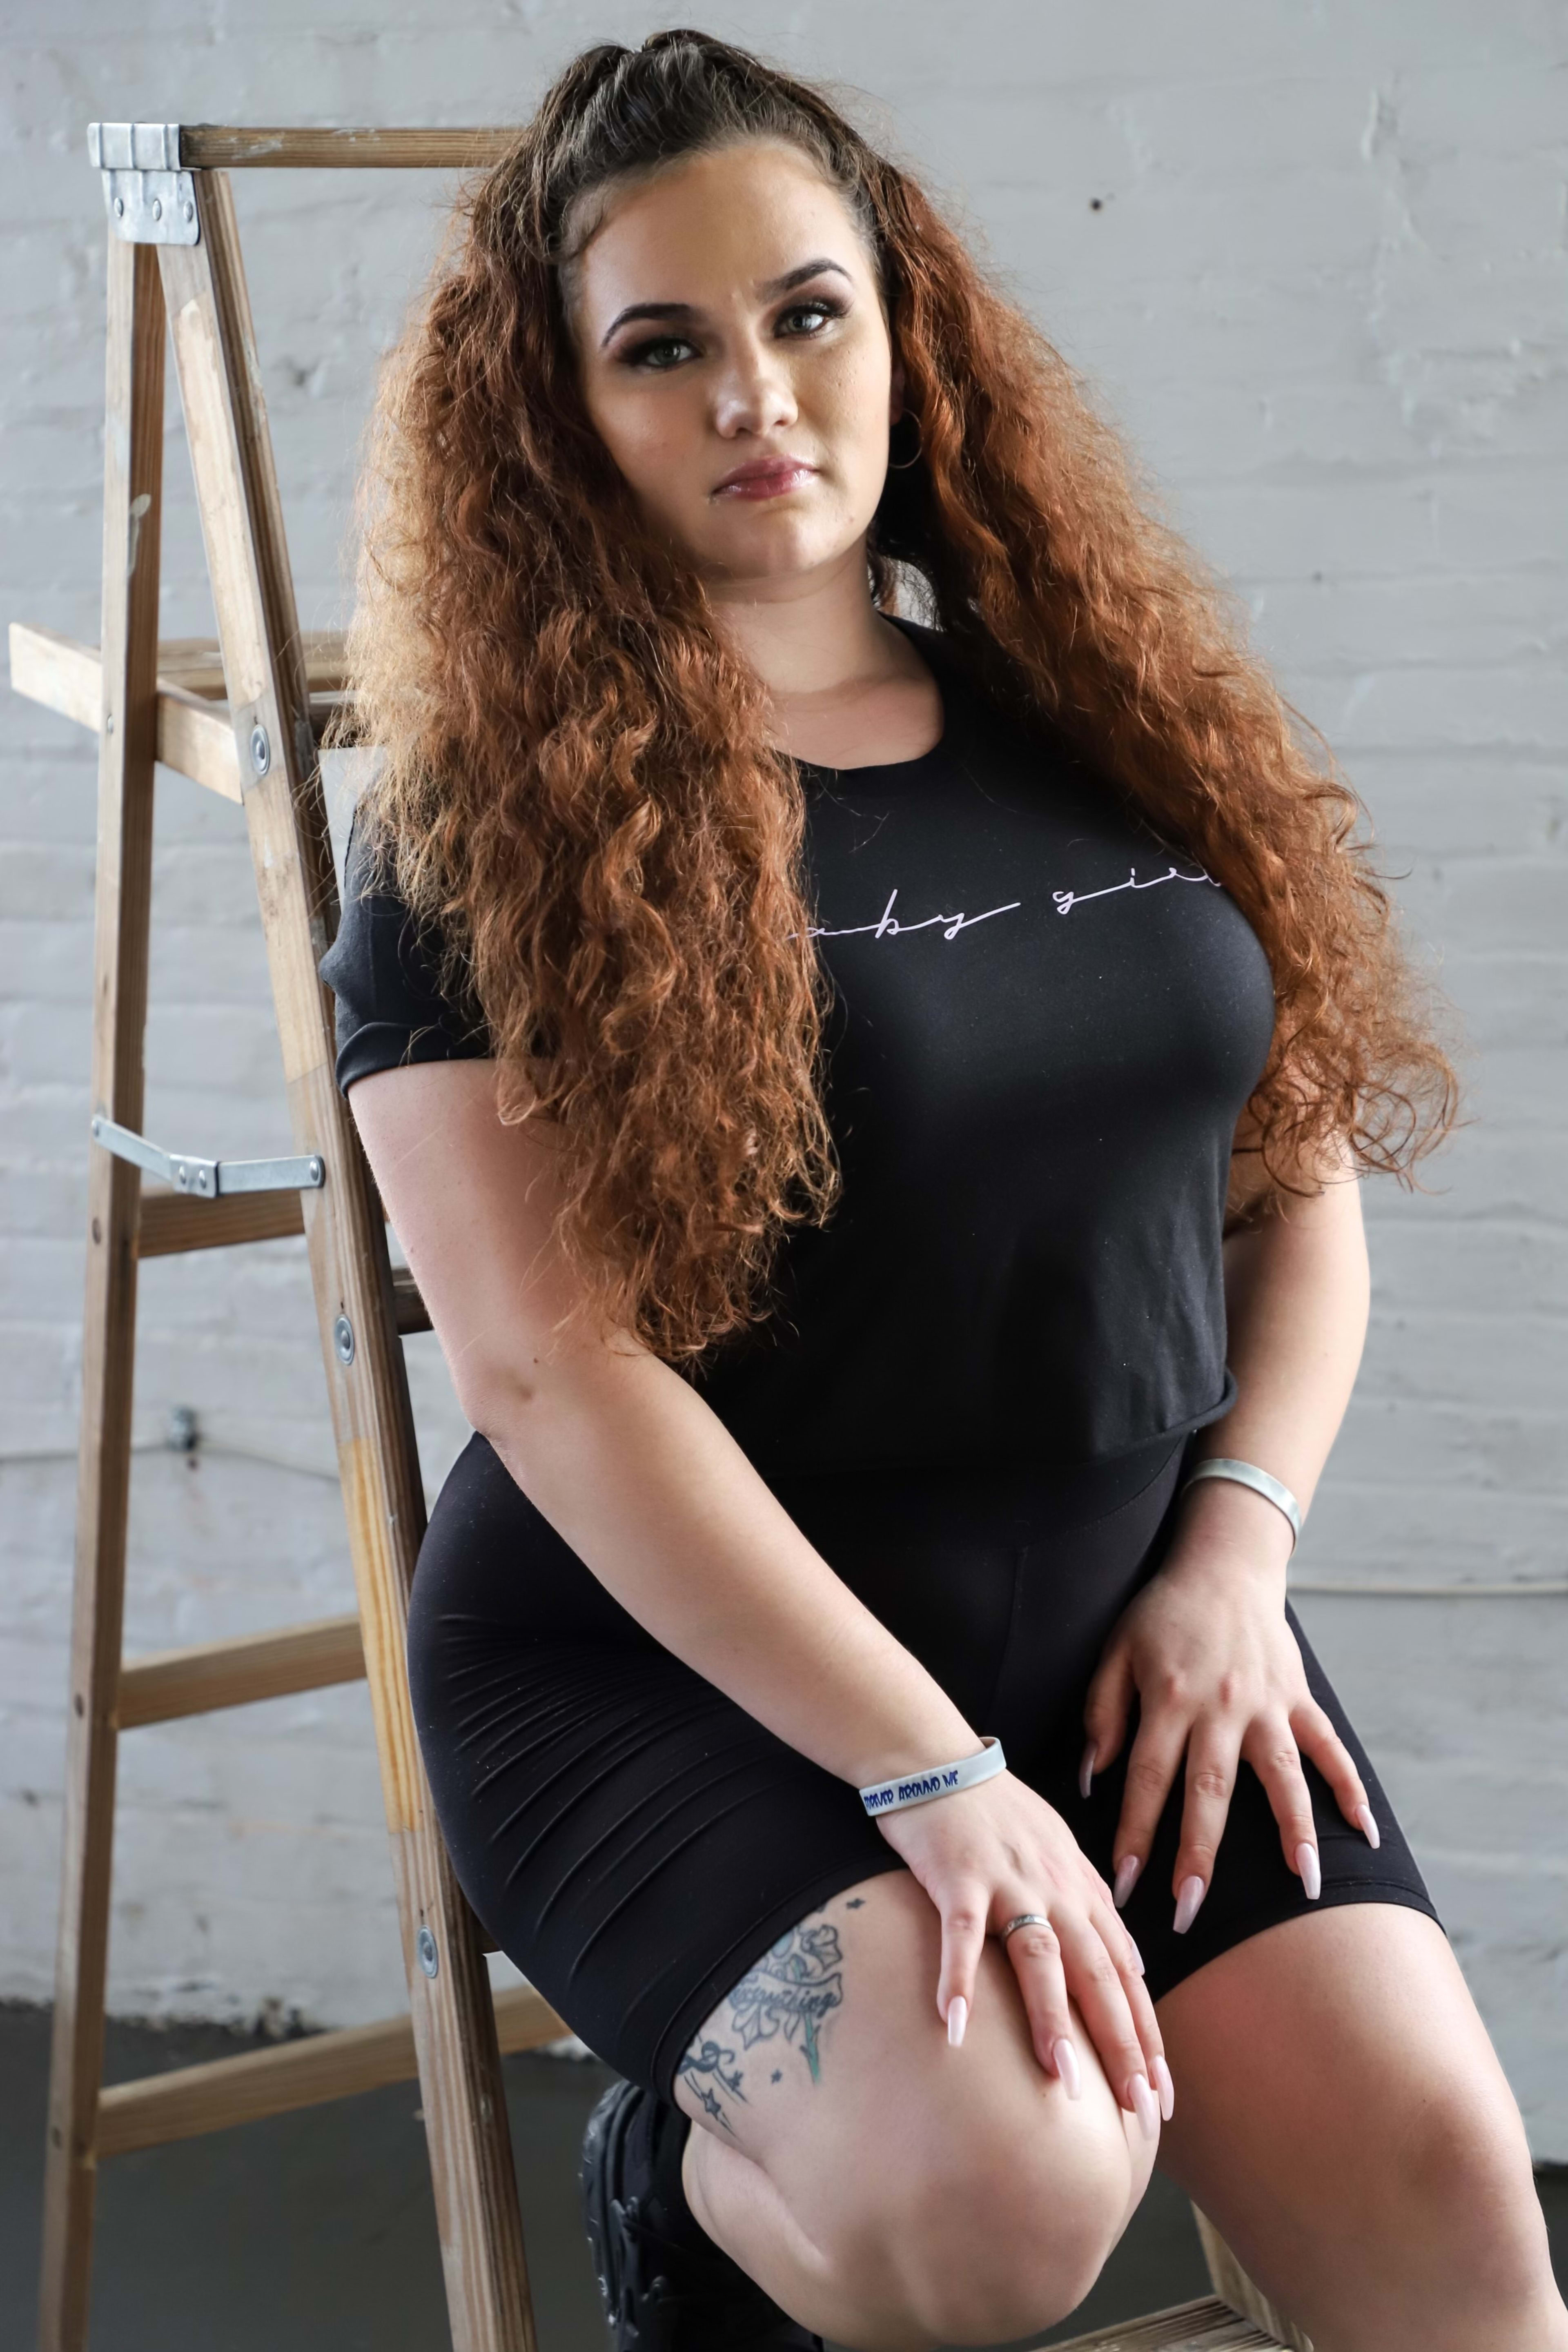 A woman posing for a portrait on a step ladder during a photo shoot.